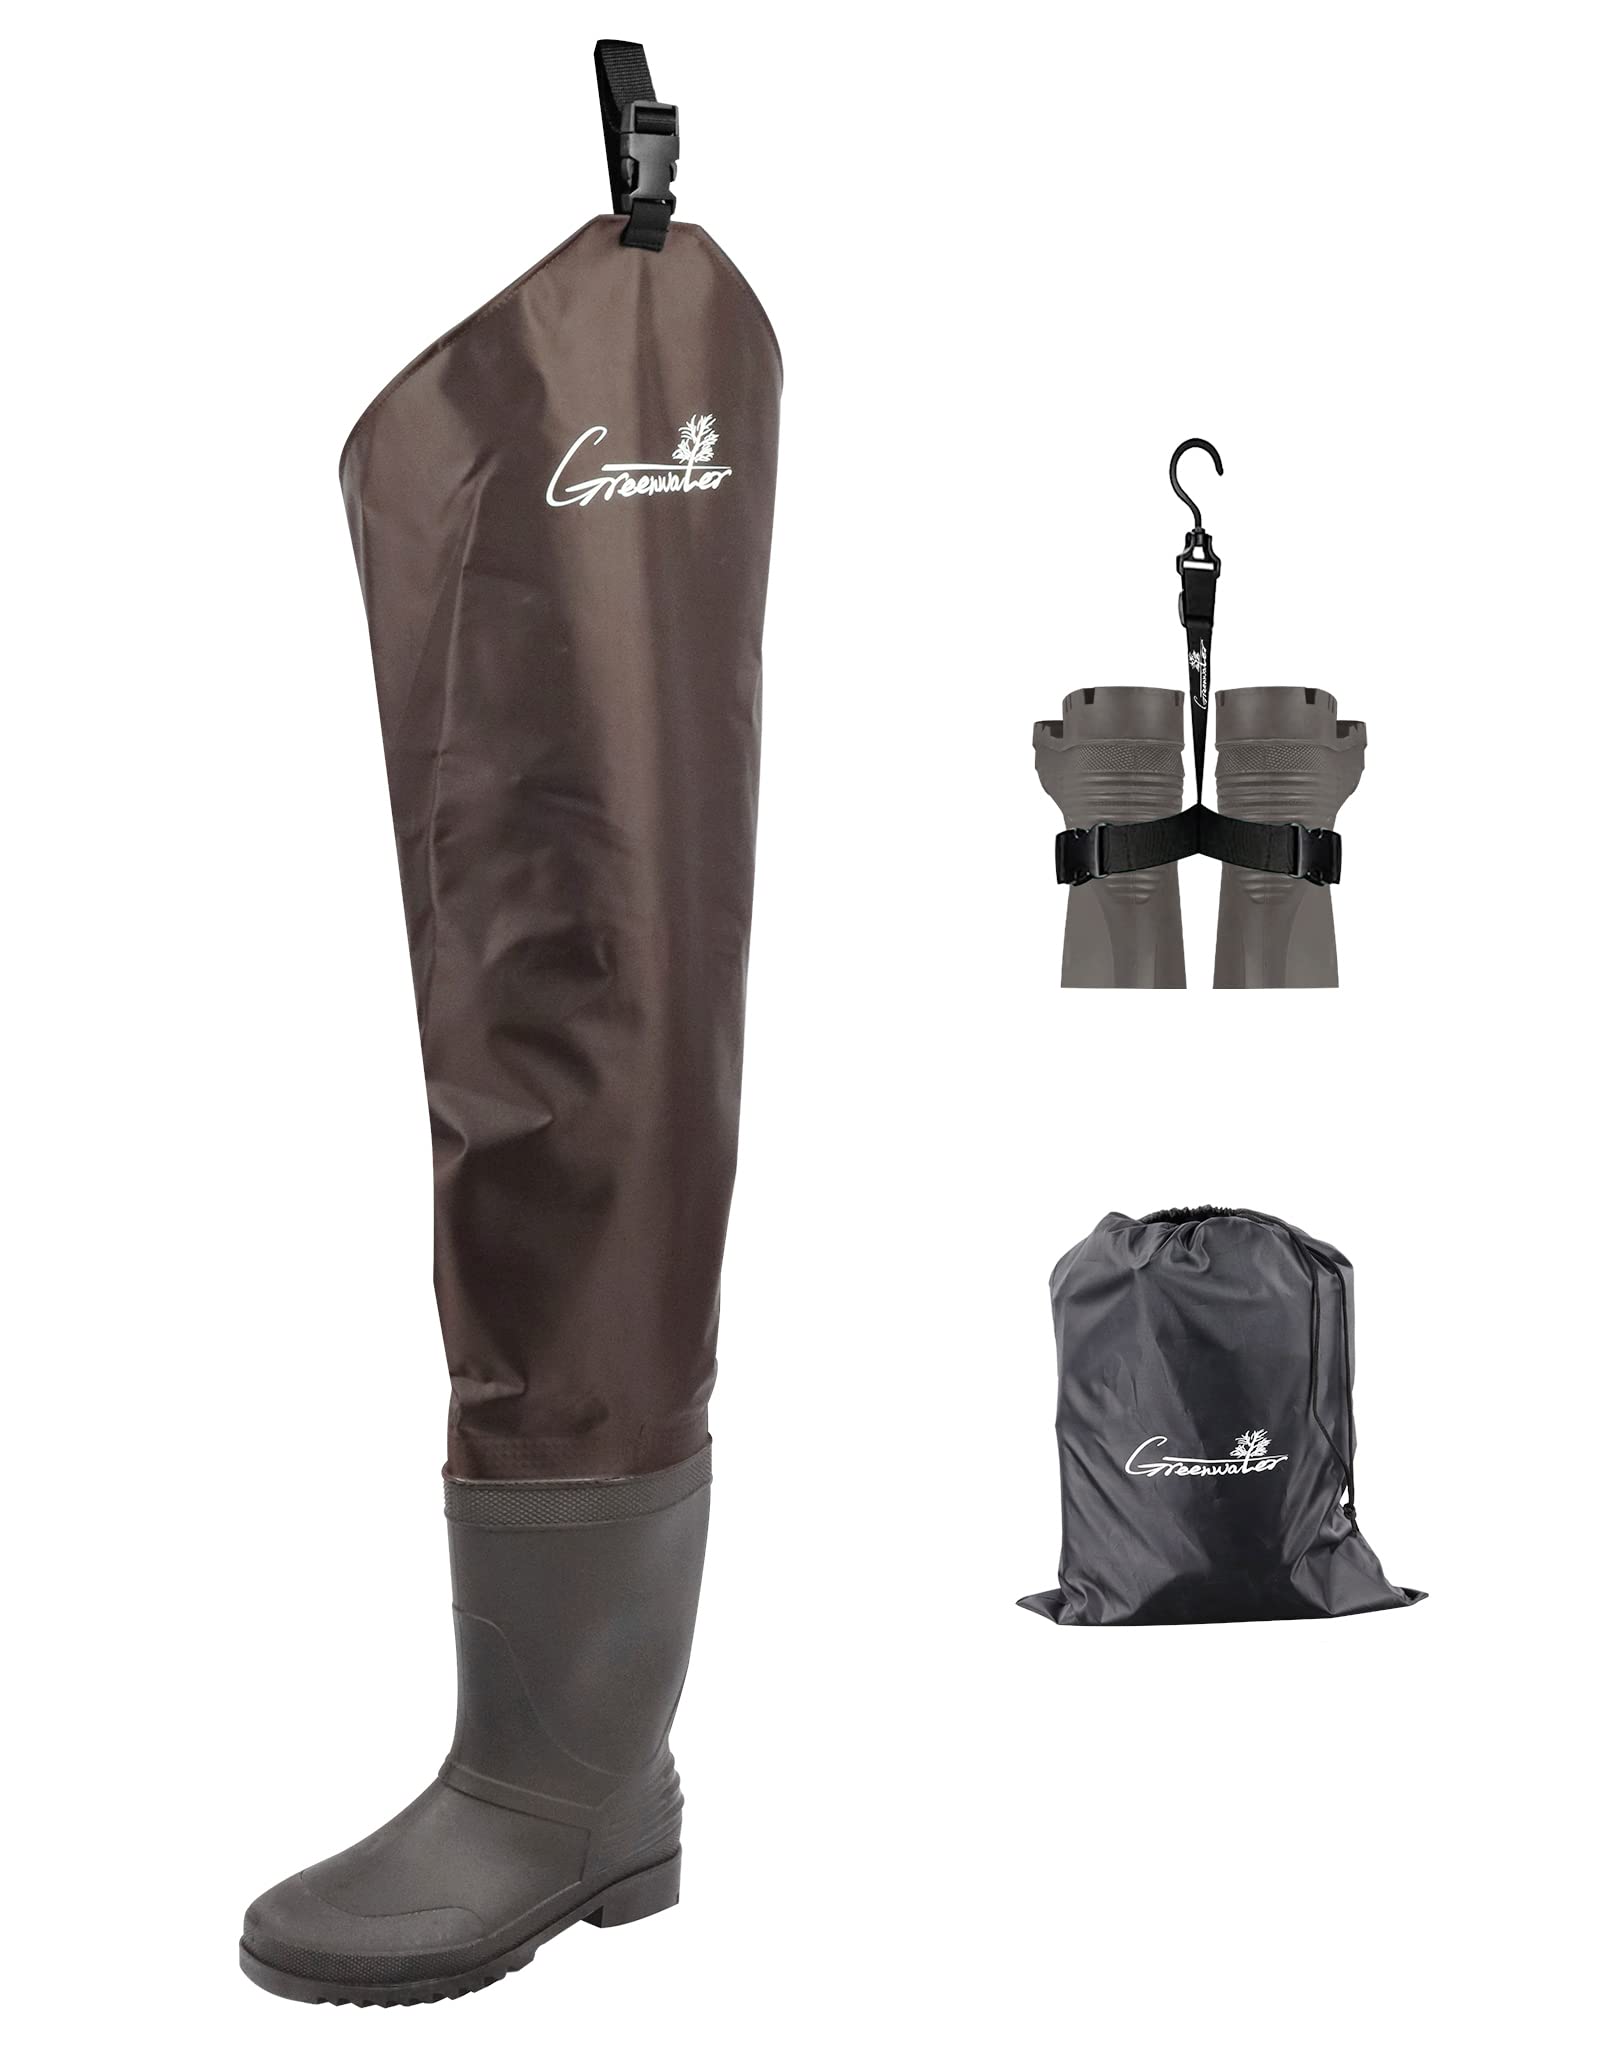 GREENWATER Hip Waders for Men Women with Boots Waterproof,2-Ply